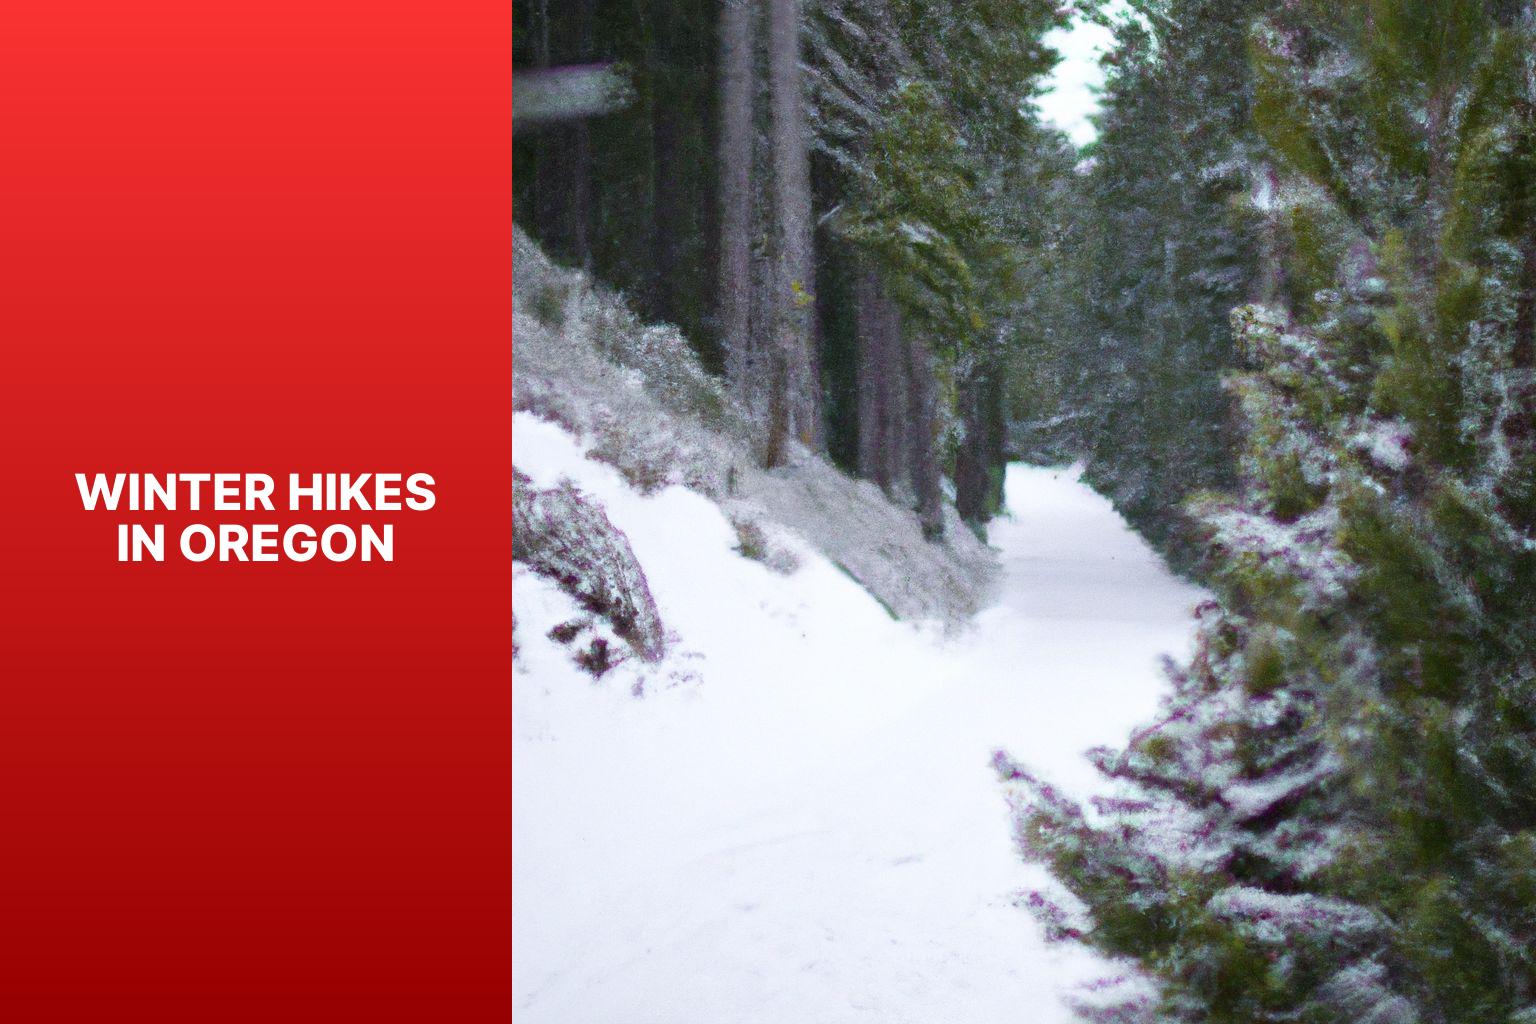 winter hikes in oregonc1p4